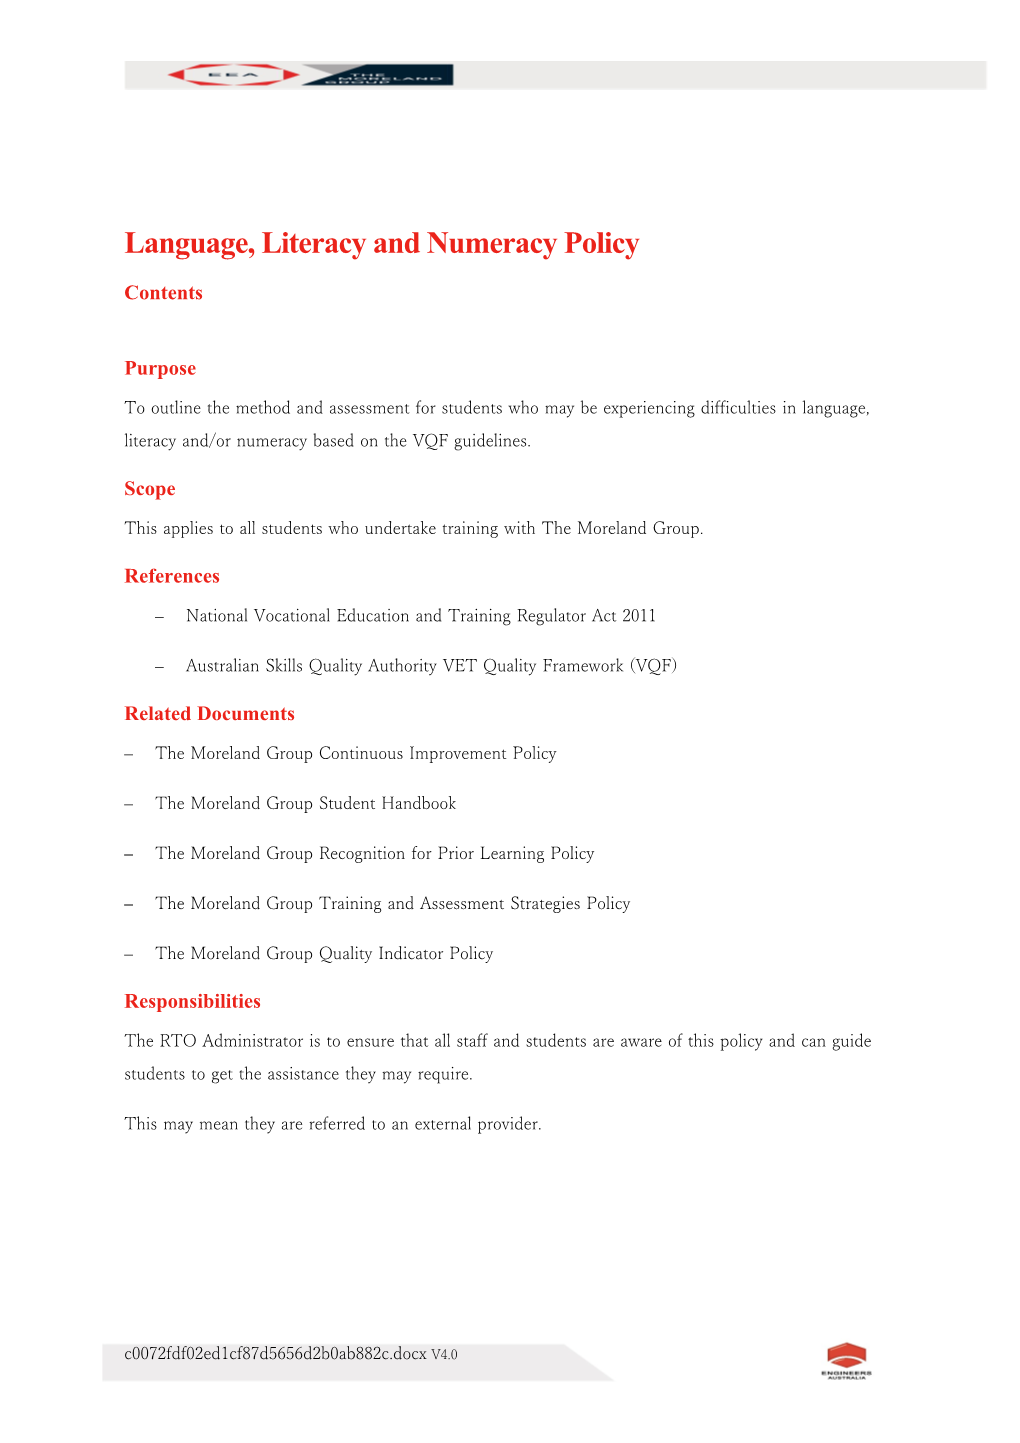 Language, Literacy and Numeracy Policy